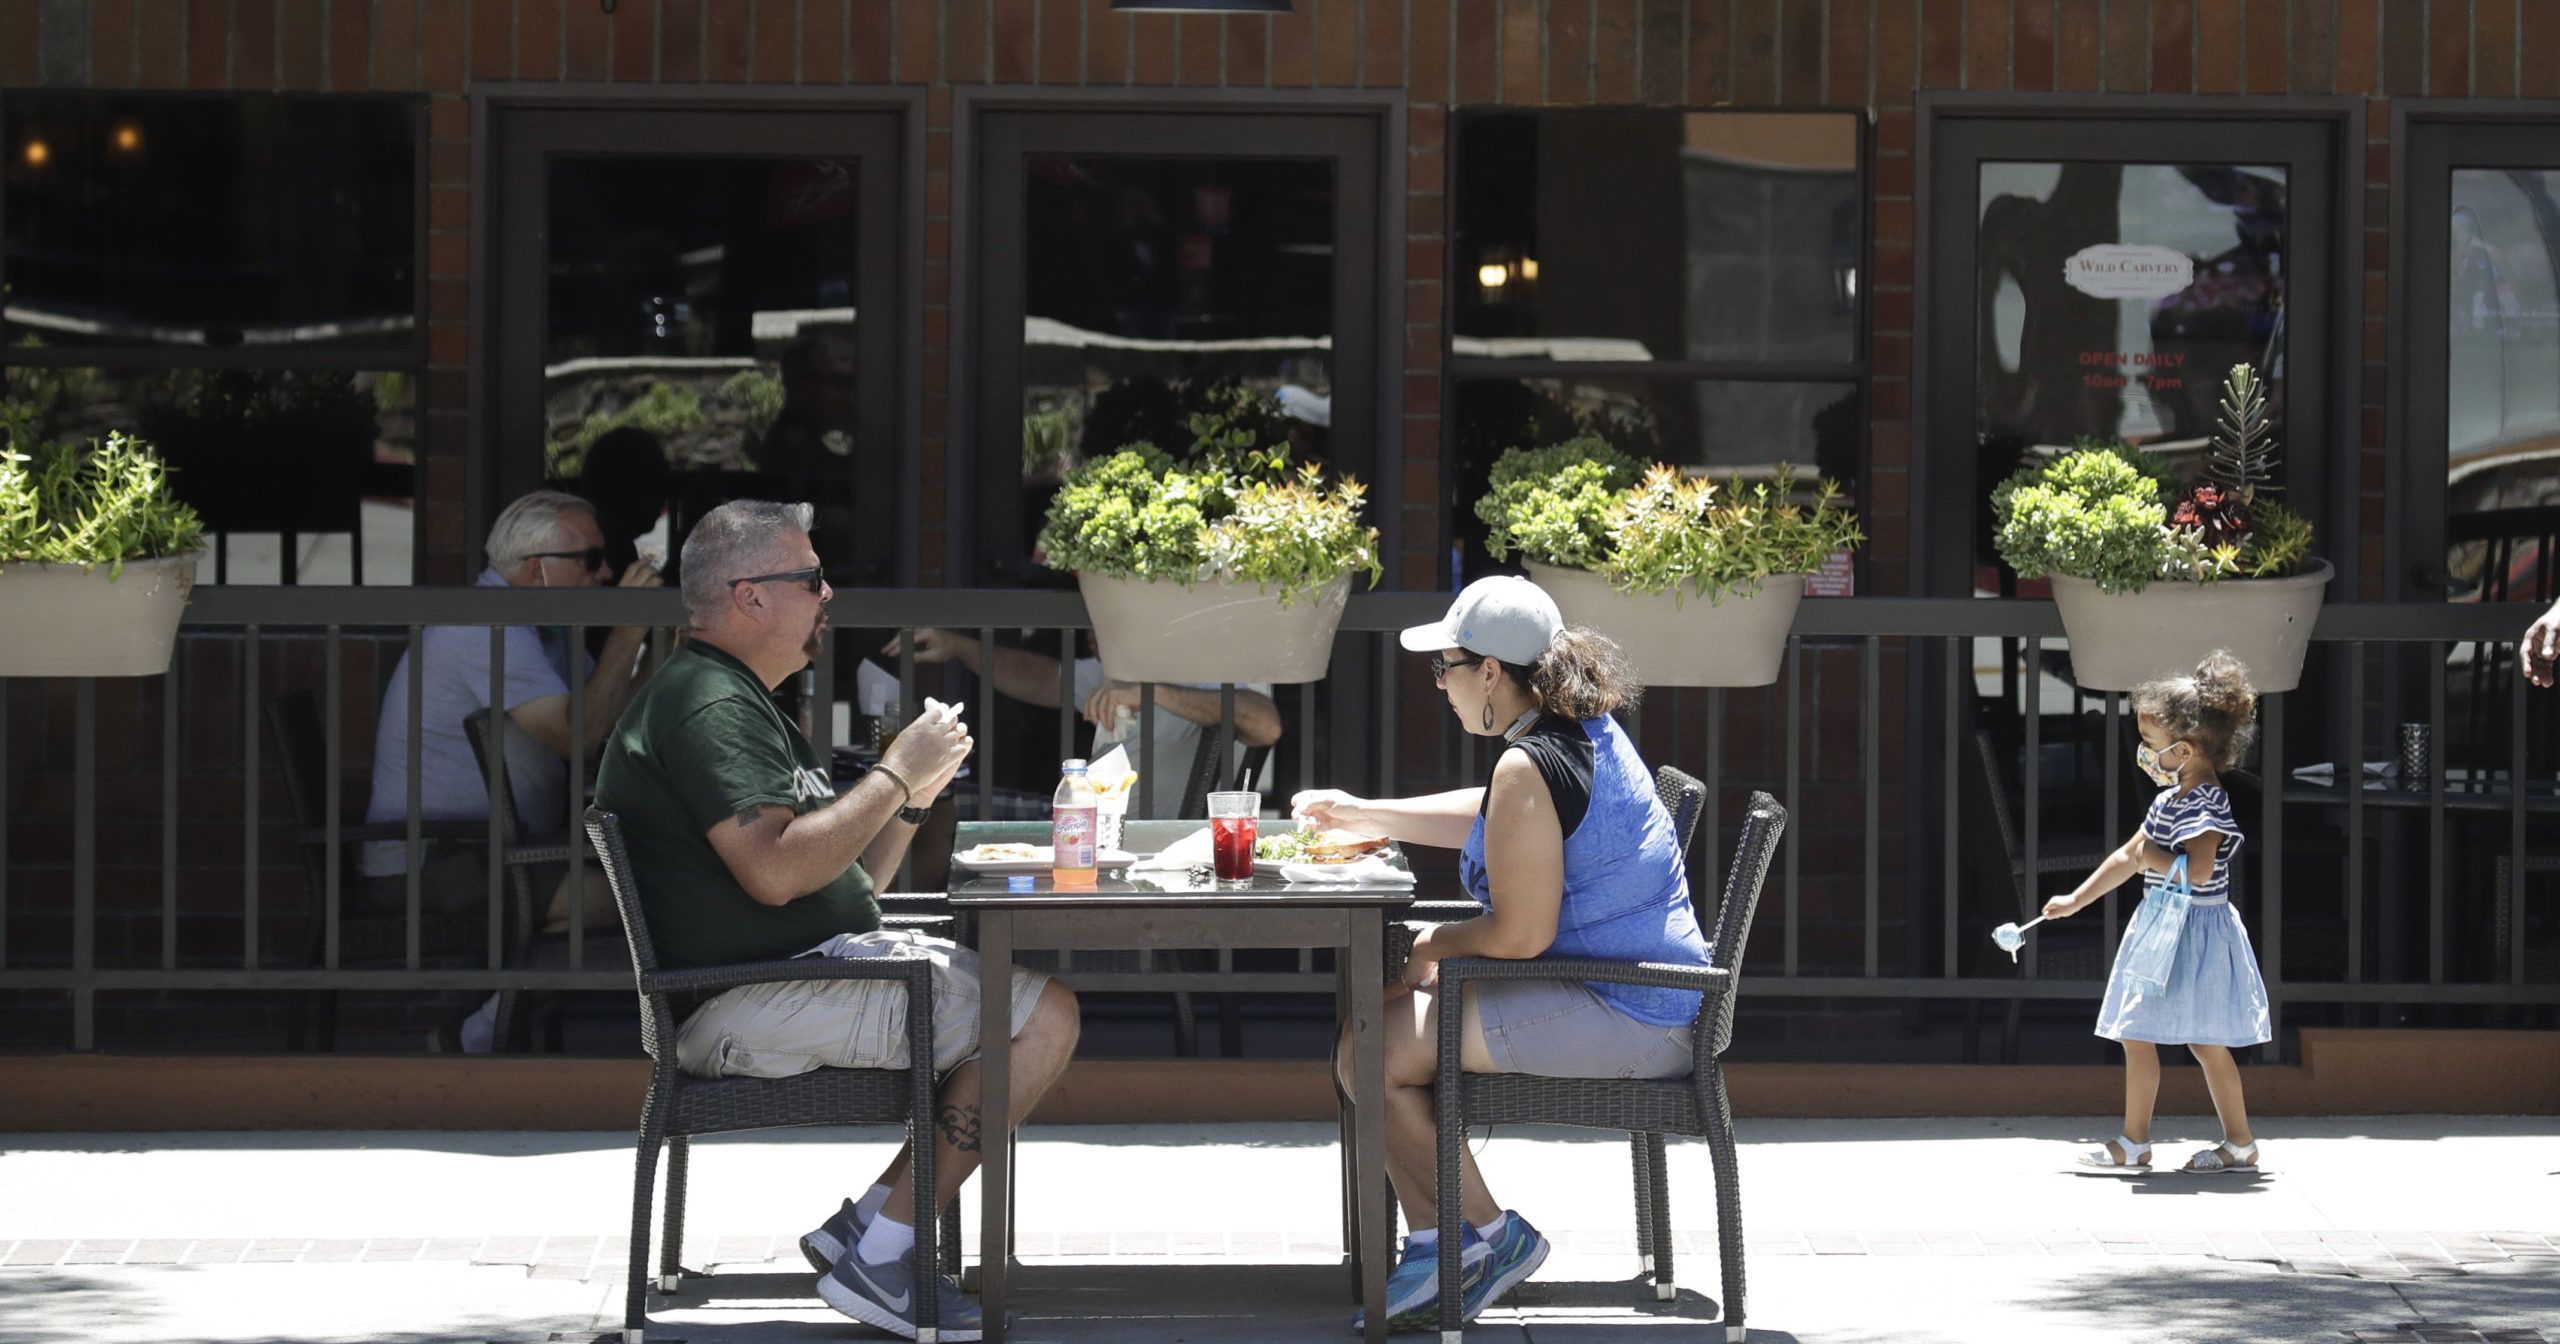 Patrons eat at a restaurant table set up on a sidewalk in Burbank, California, on July 18.